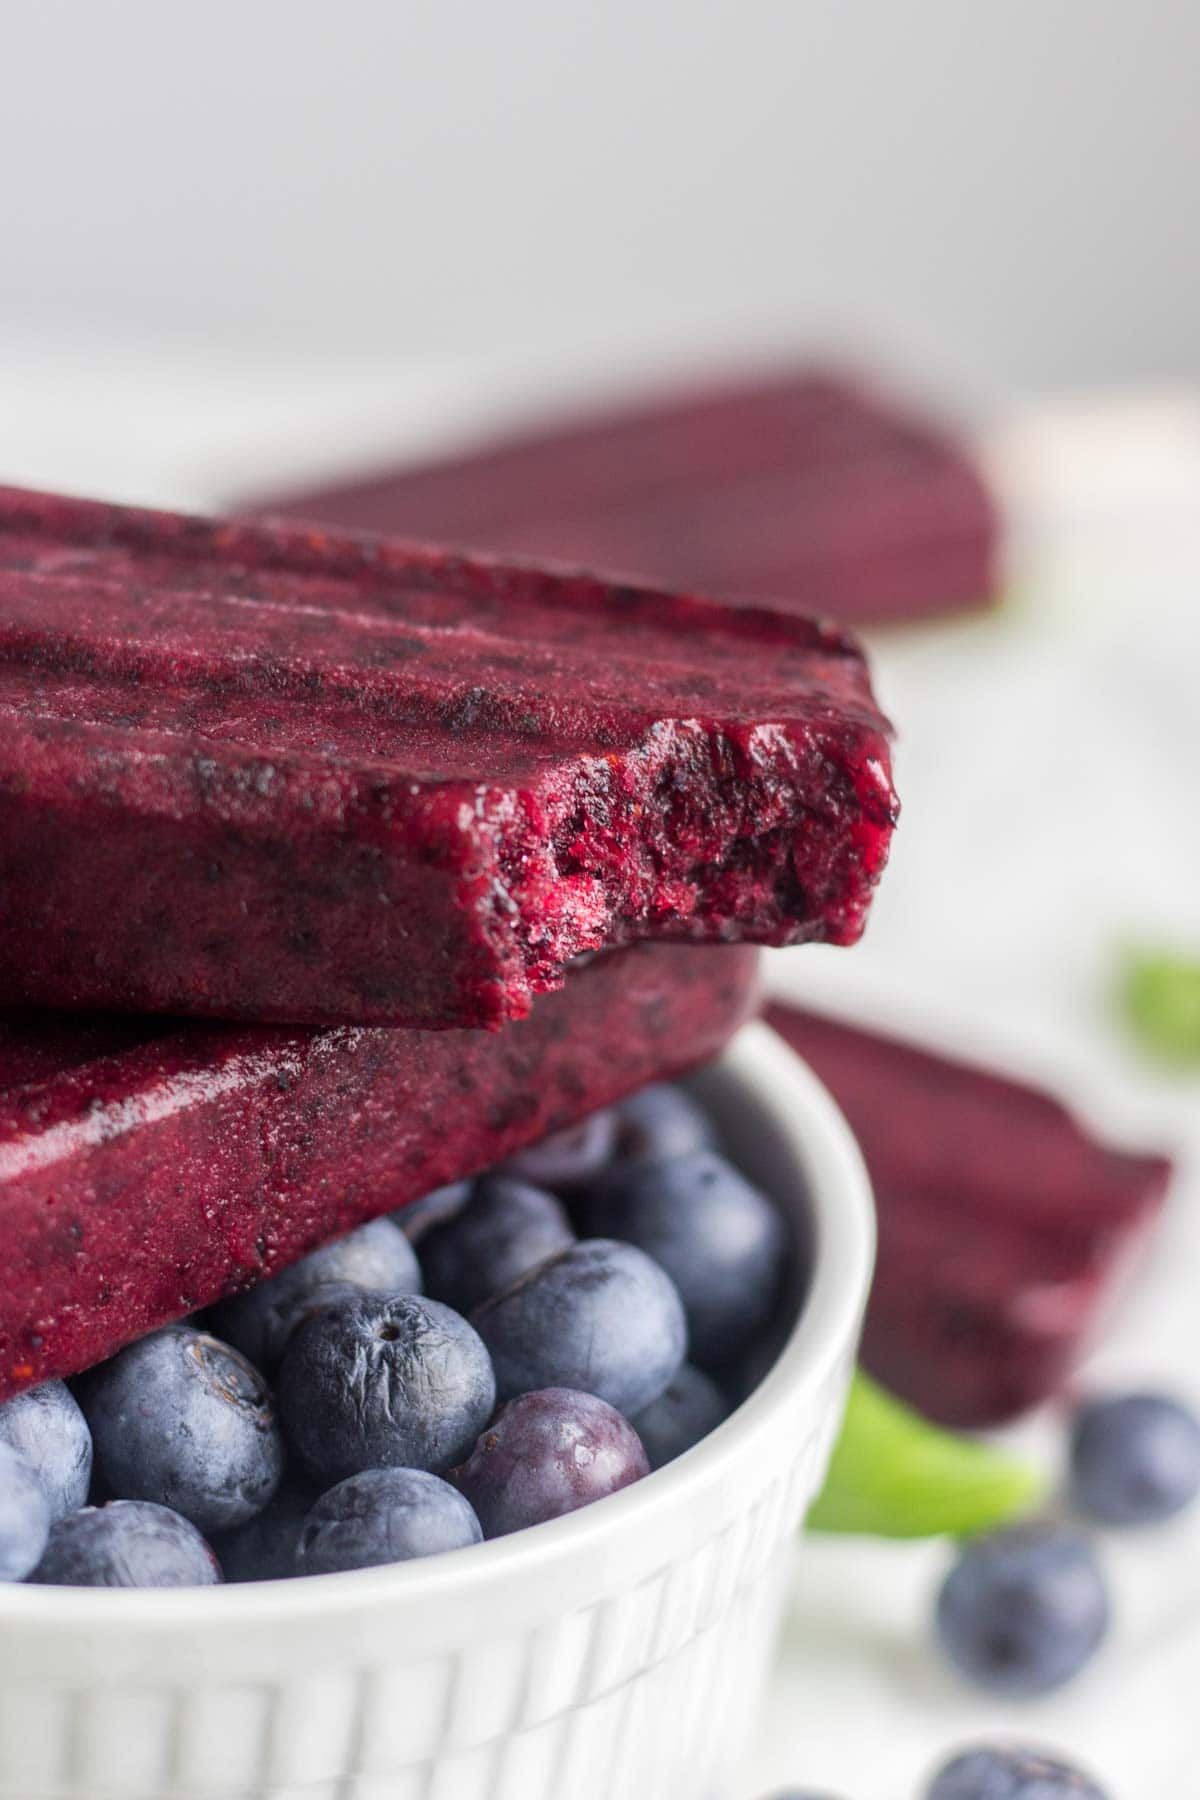 Healthy, 3-ingredient blueberry basil popsicles are the perfect easy and healthy treat! They take less than 15 minutes to make and freeze in a couple hours. Your family and friends will be amazed that they’re made with whole foods and taste so delicious and sweet!